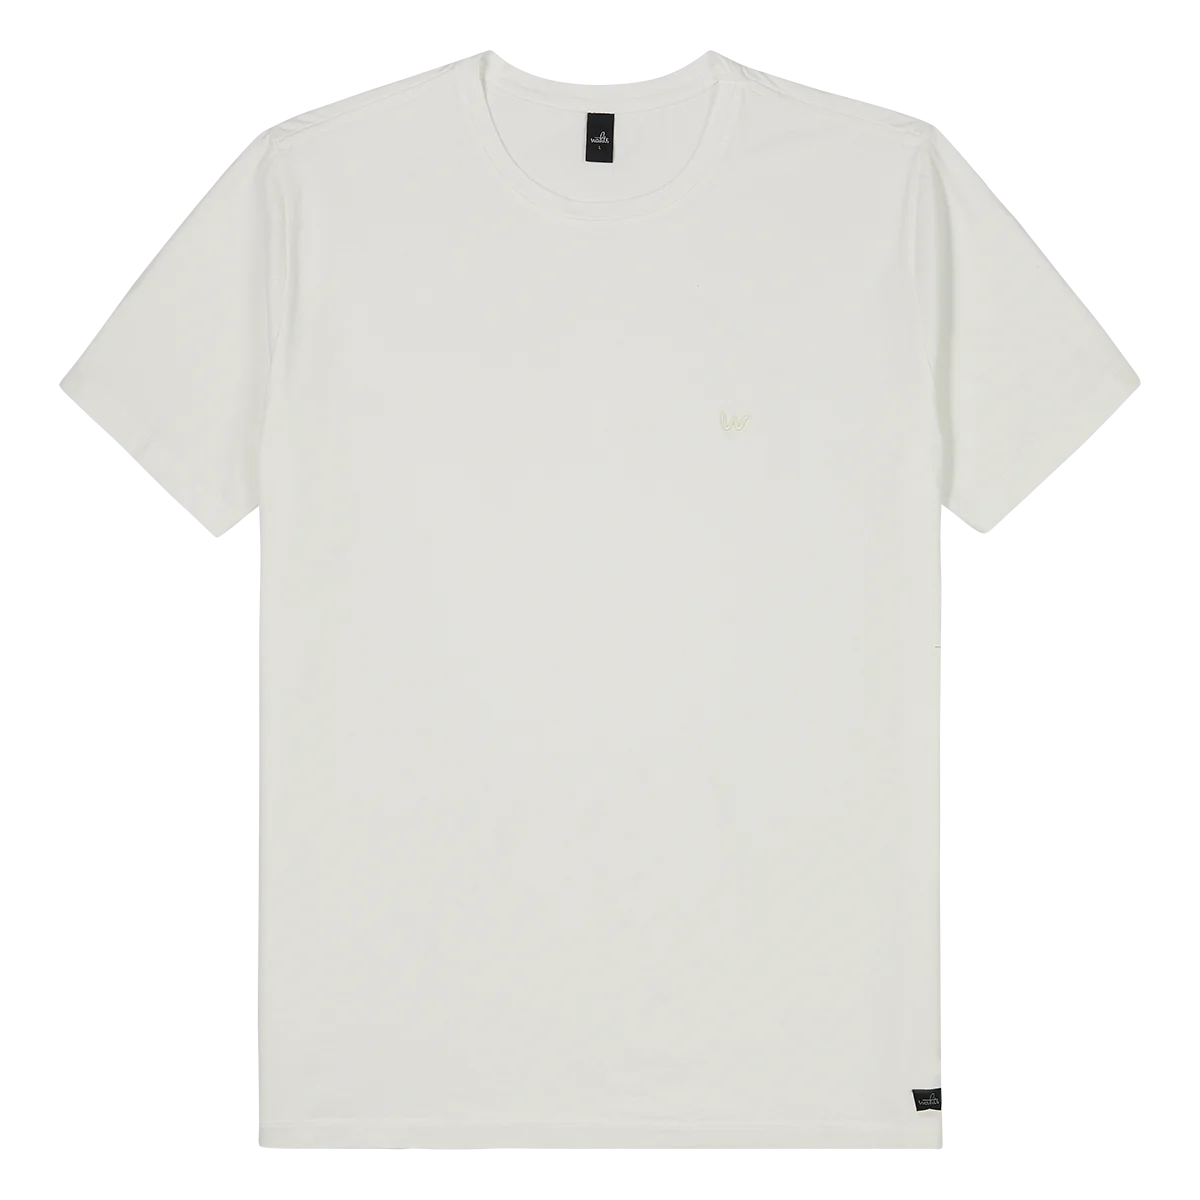 Woods Carbon Pure White Tee